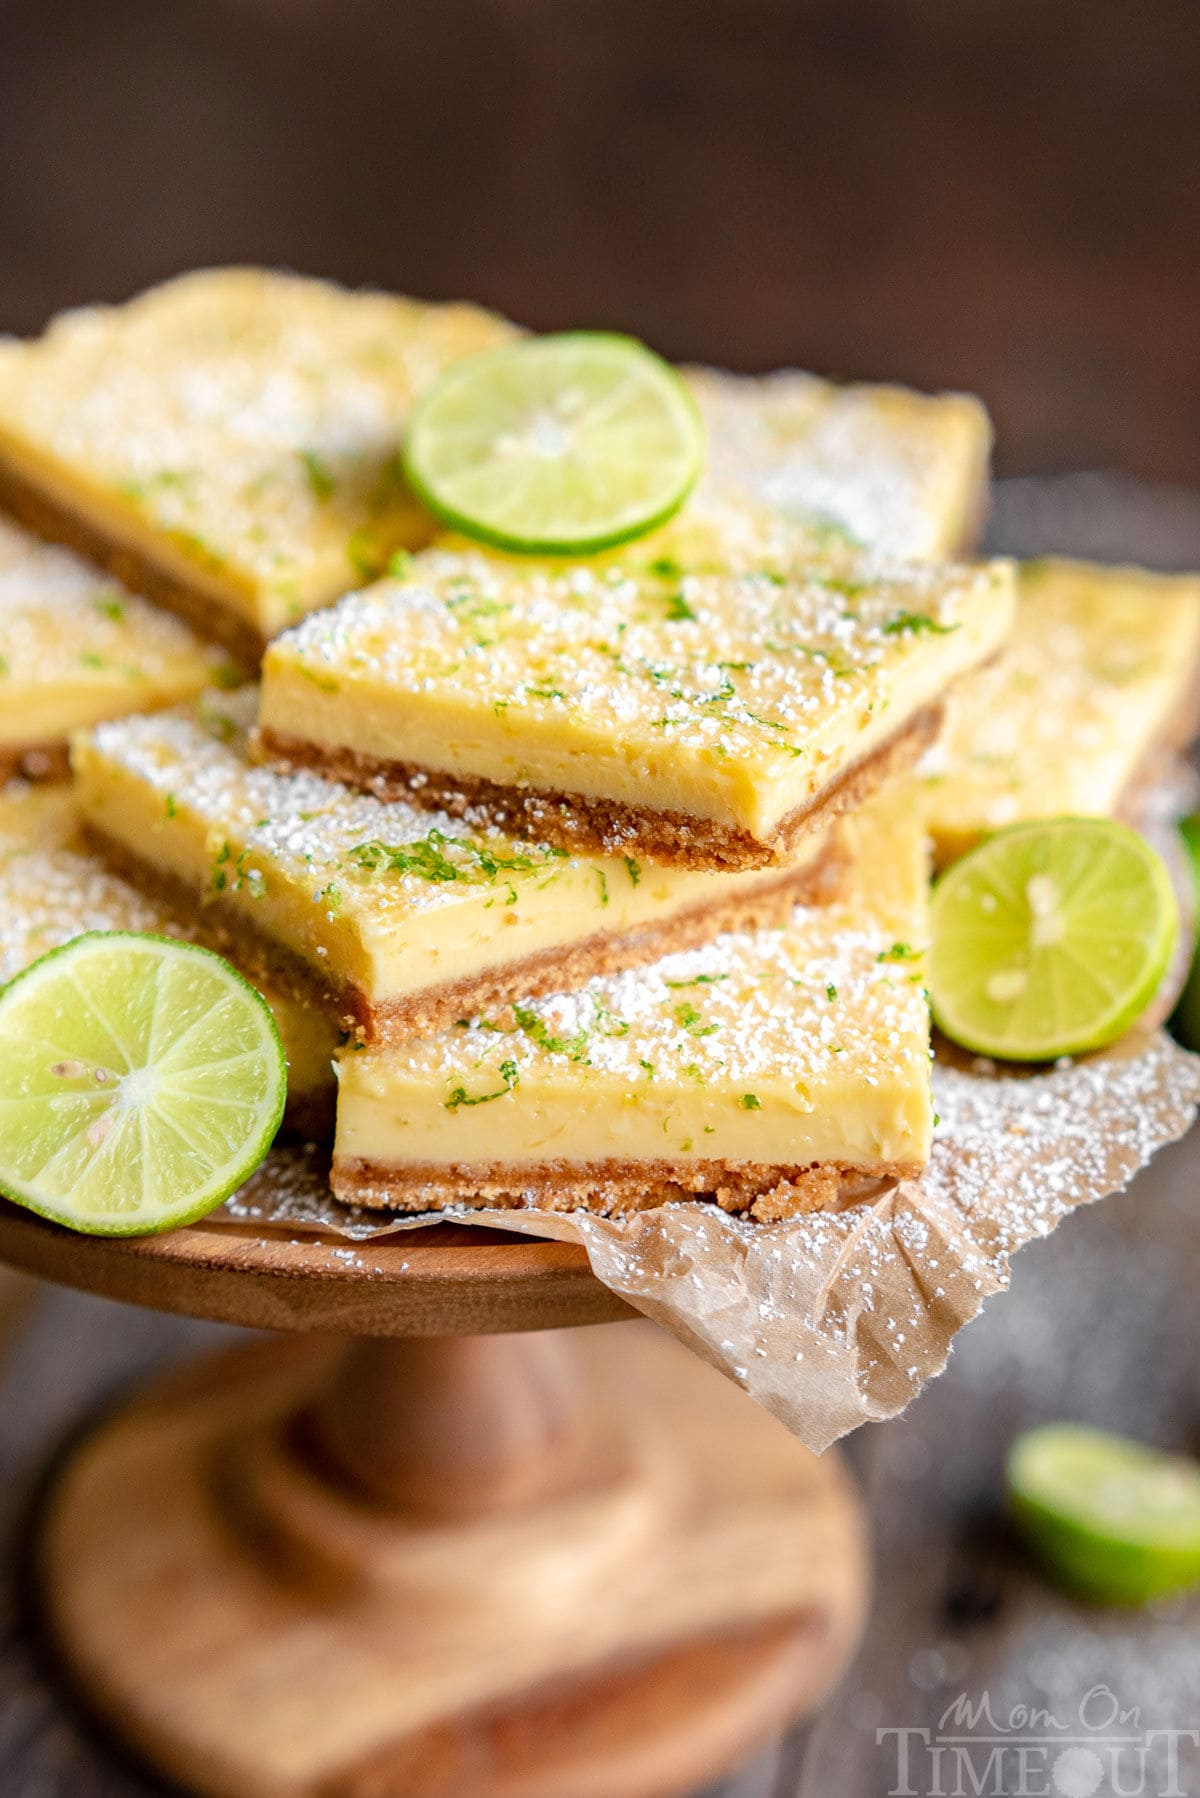 wood cake stand piled high with key lime bars topped with key lime zest and a light dusting of powdered sugar. Slices of lime are scattered around the bars.